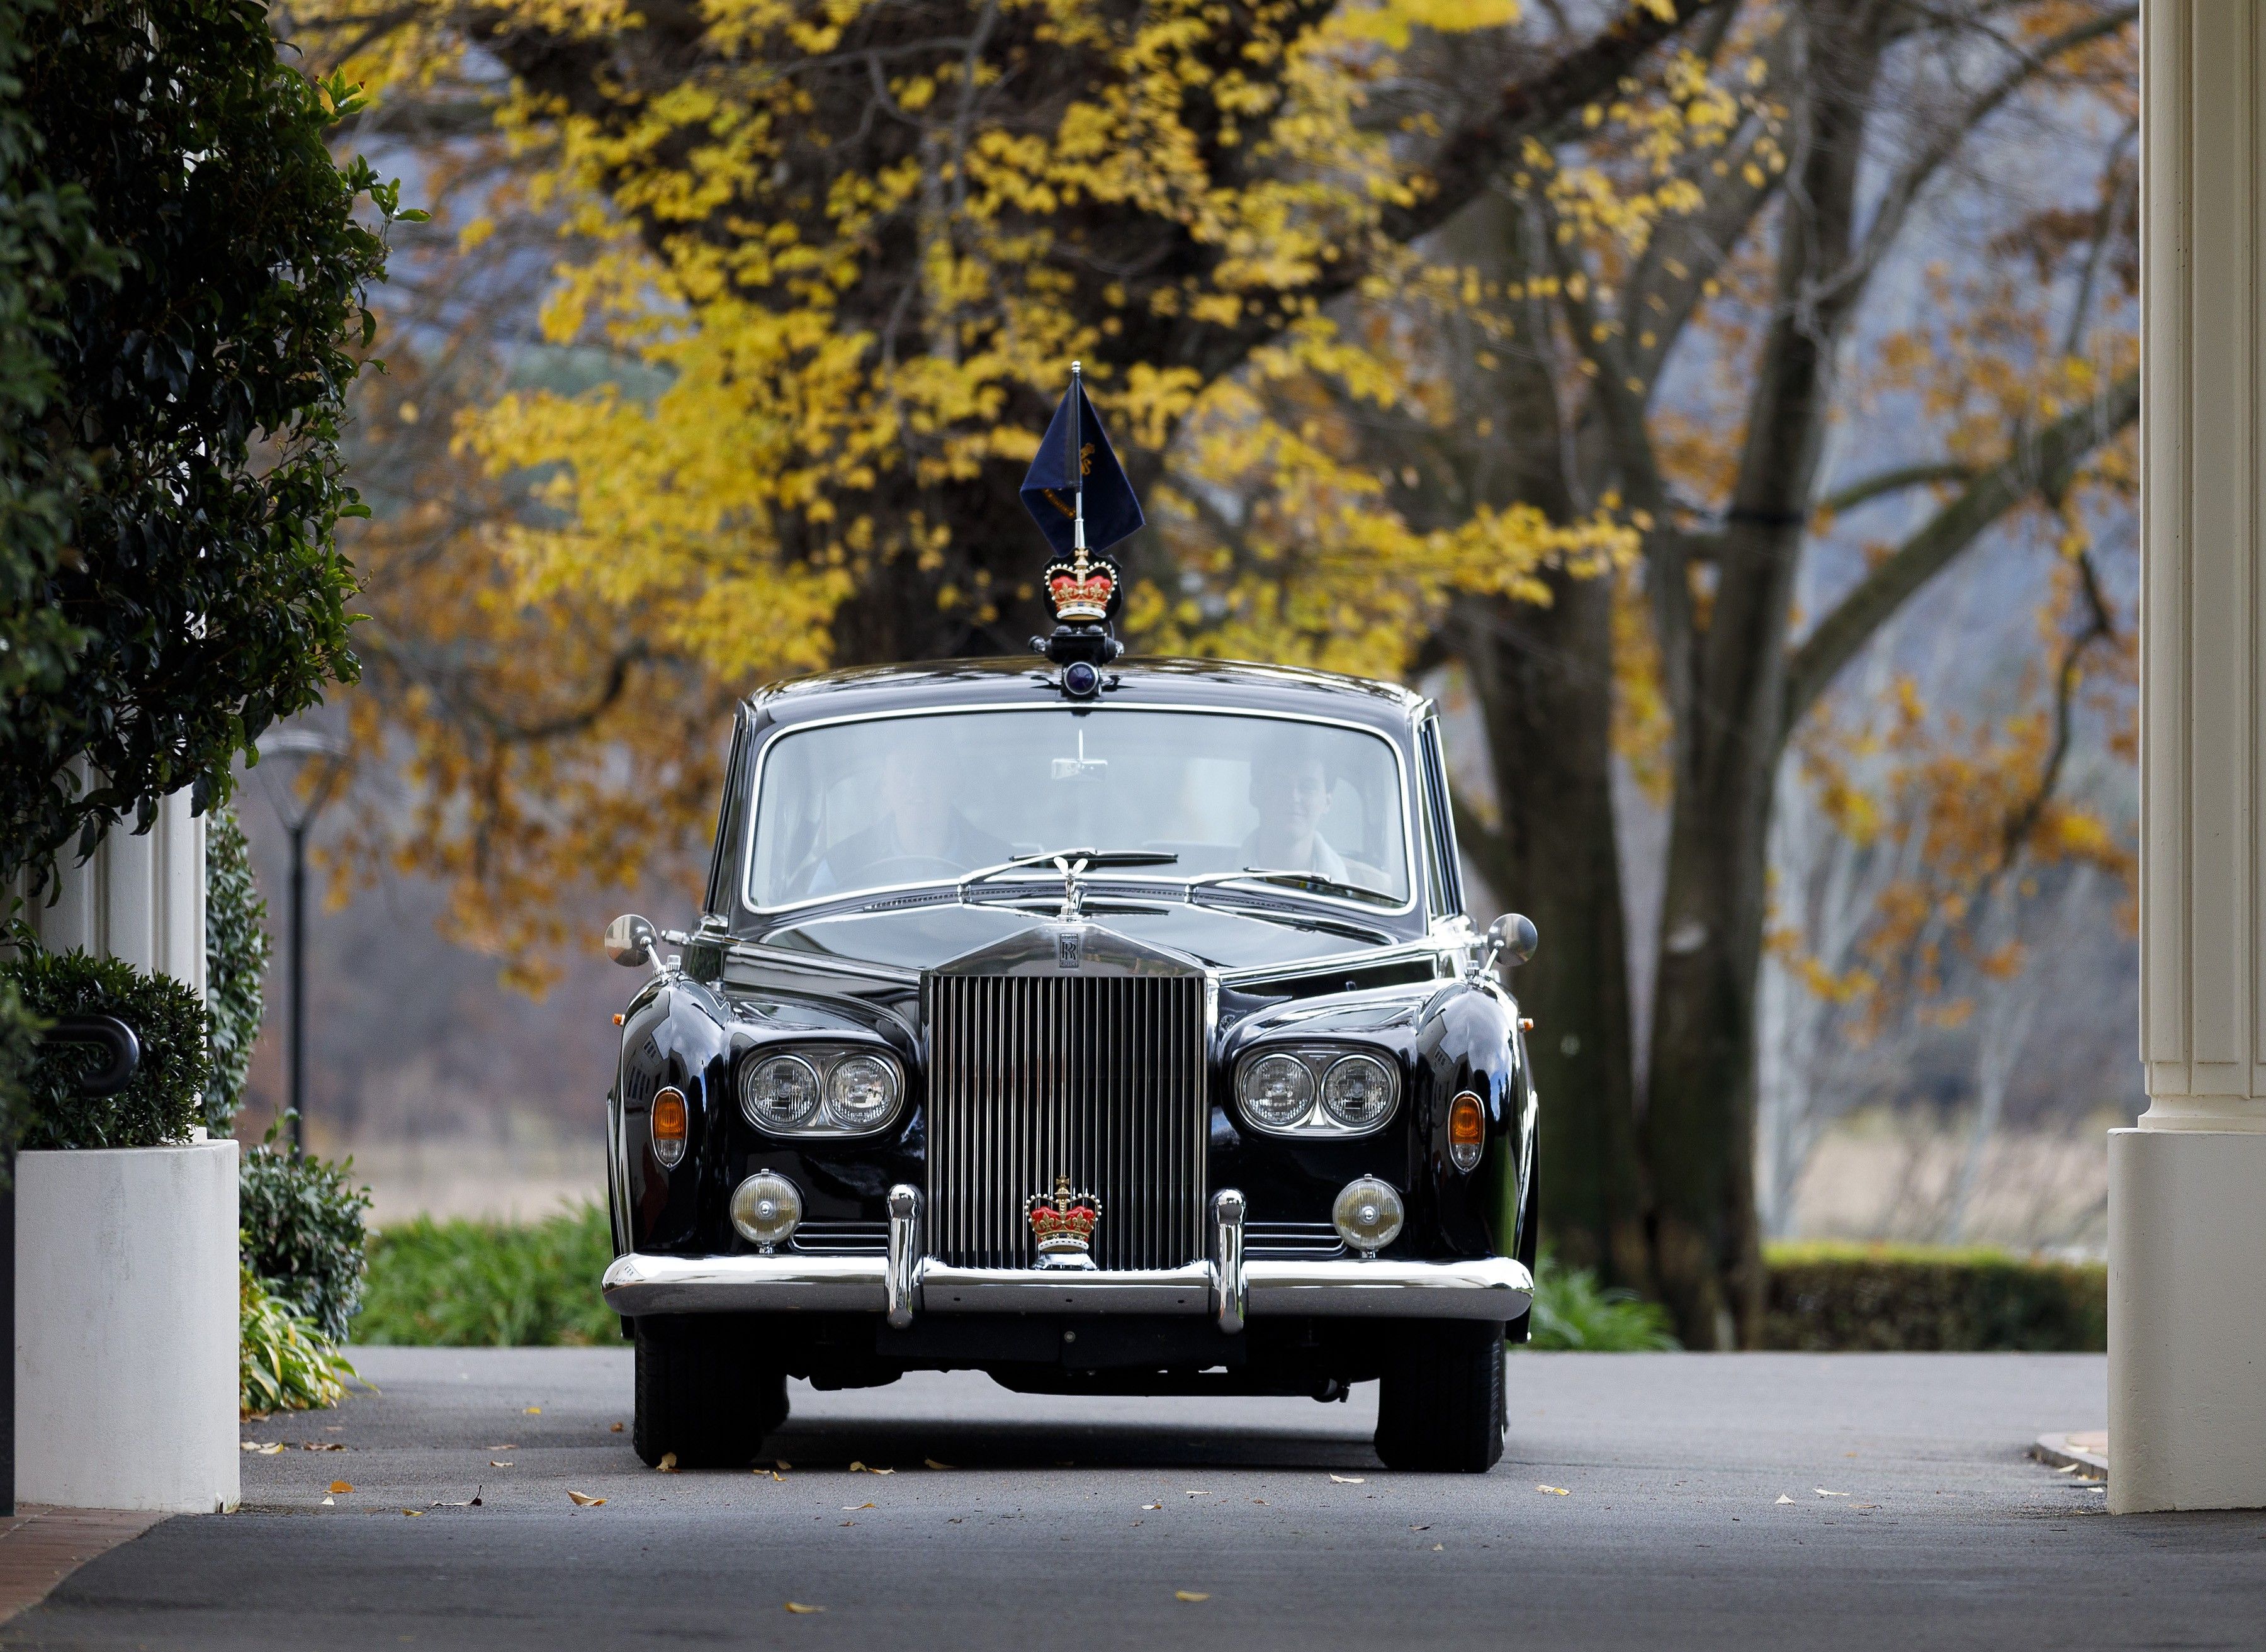 A ride in Australia's most majestic taxi: the Governor-General's Rolls-Royce